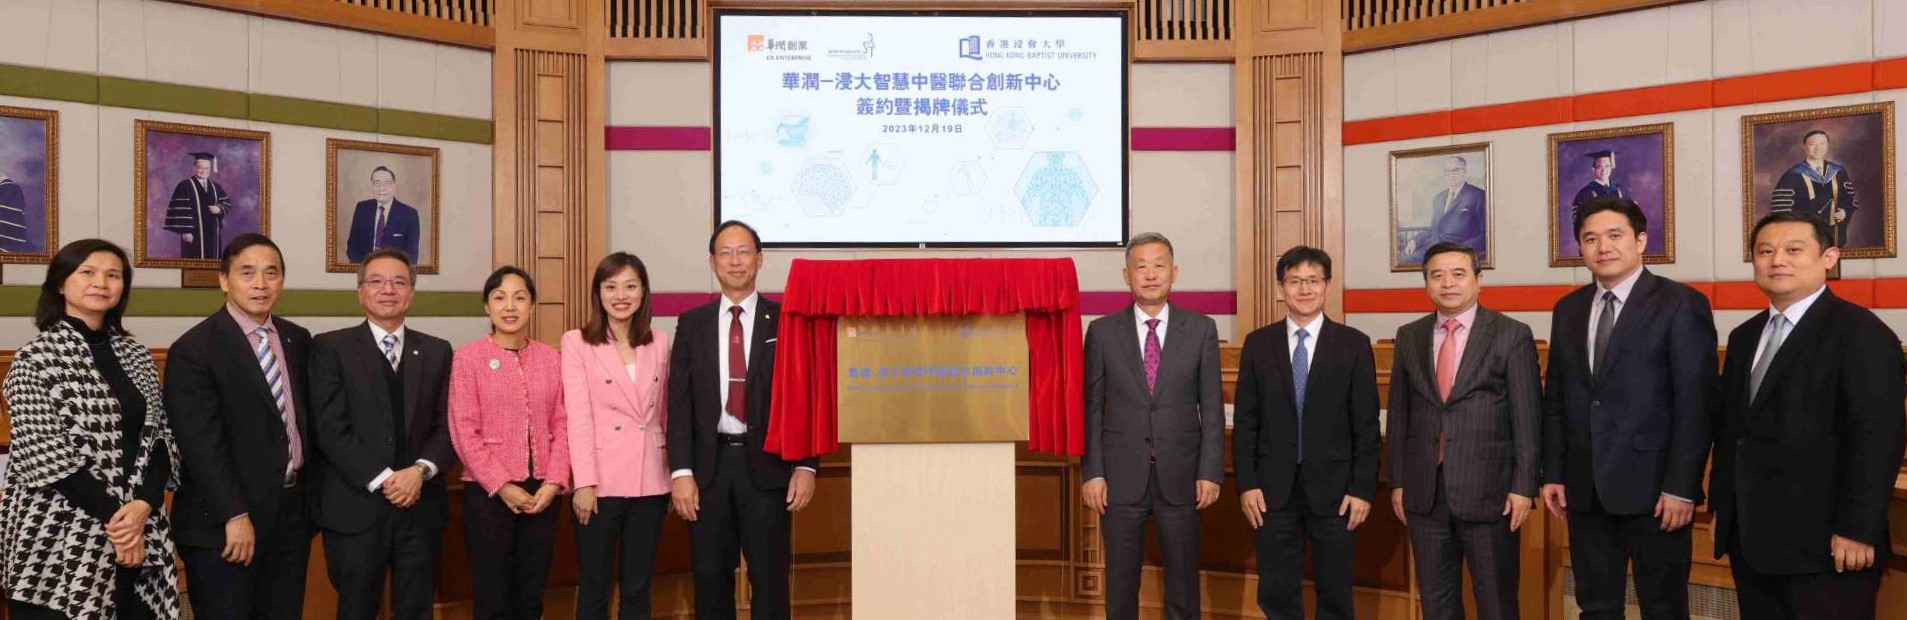 HKBU receives representatives from Consulate Generals in Hong Kong for knowledge transfer exchange